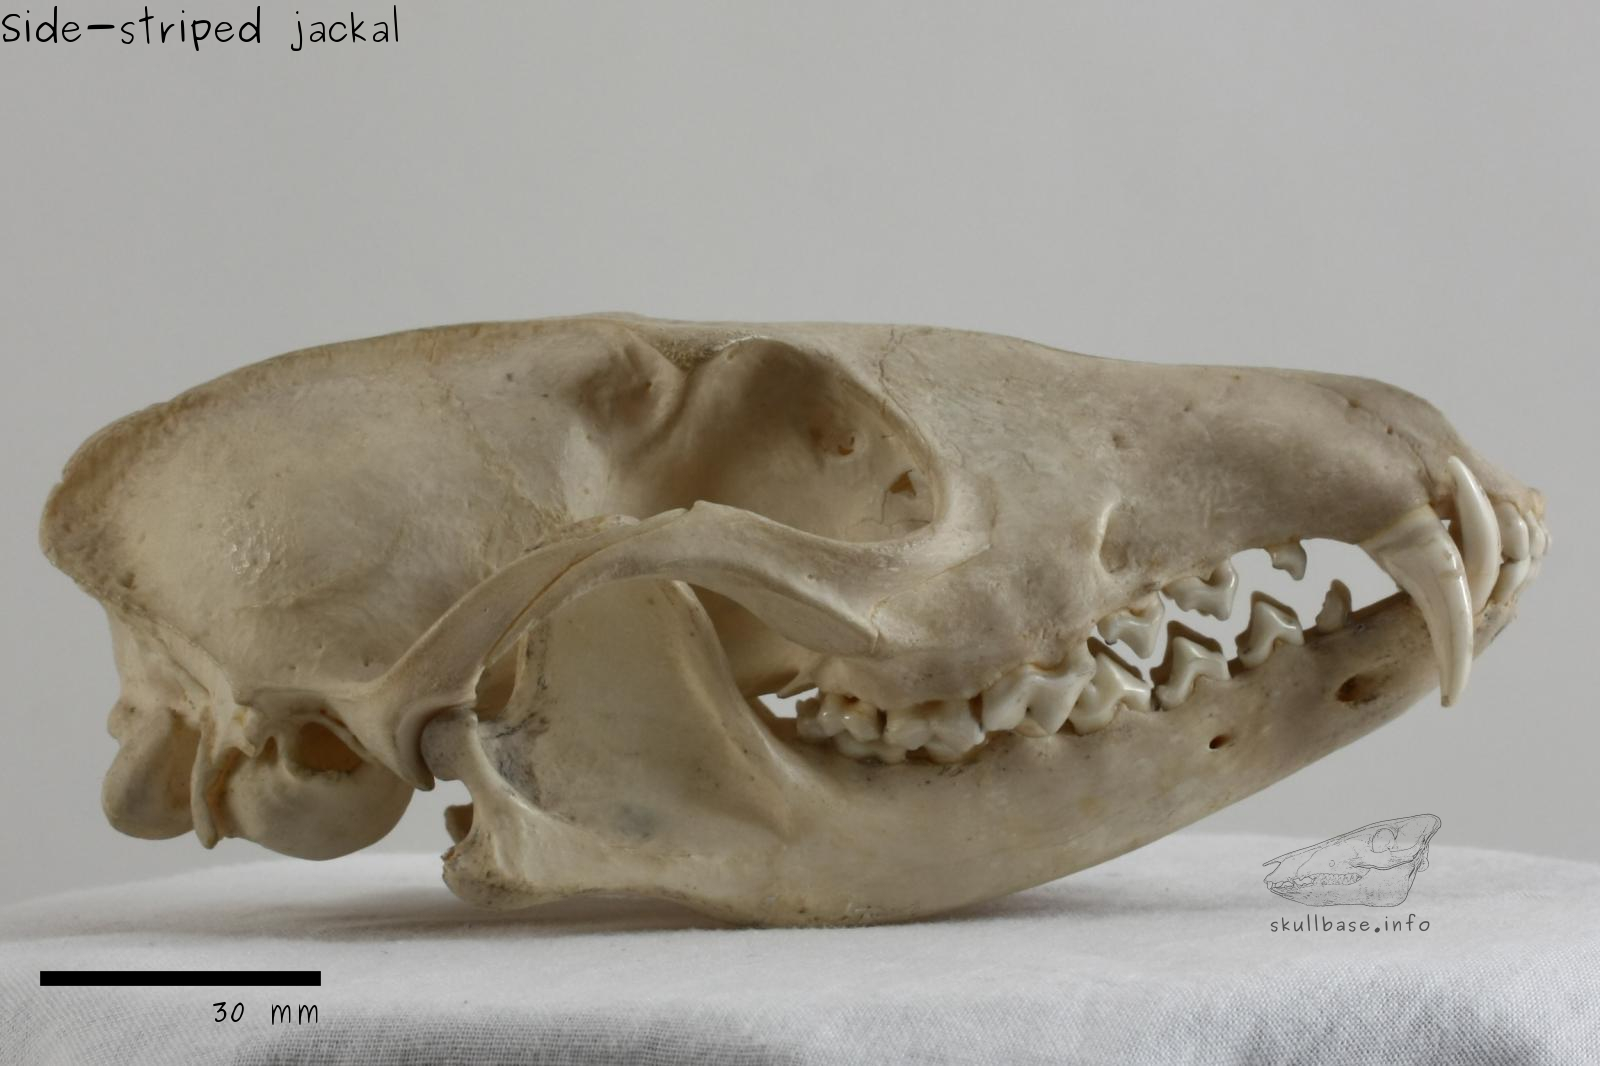 Side-striped jackal (Canis adustus) skull lateral view